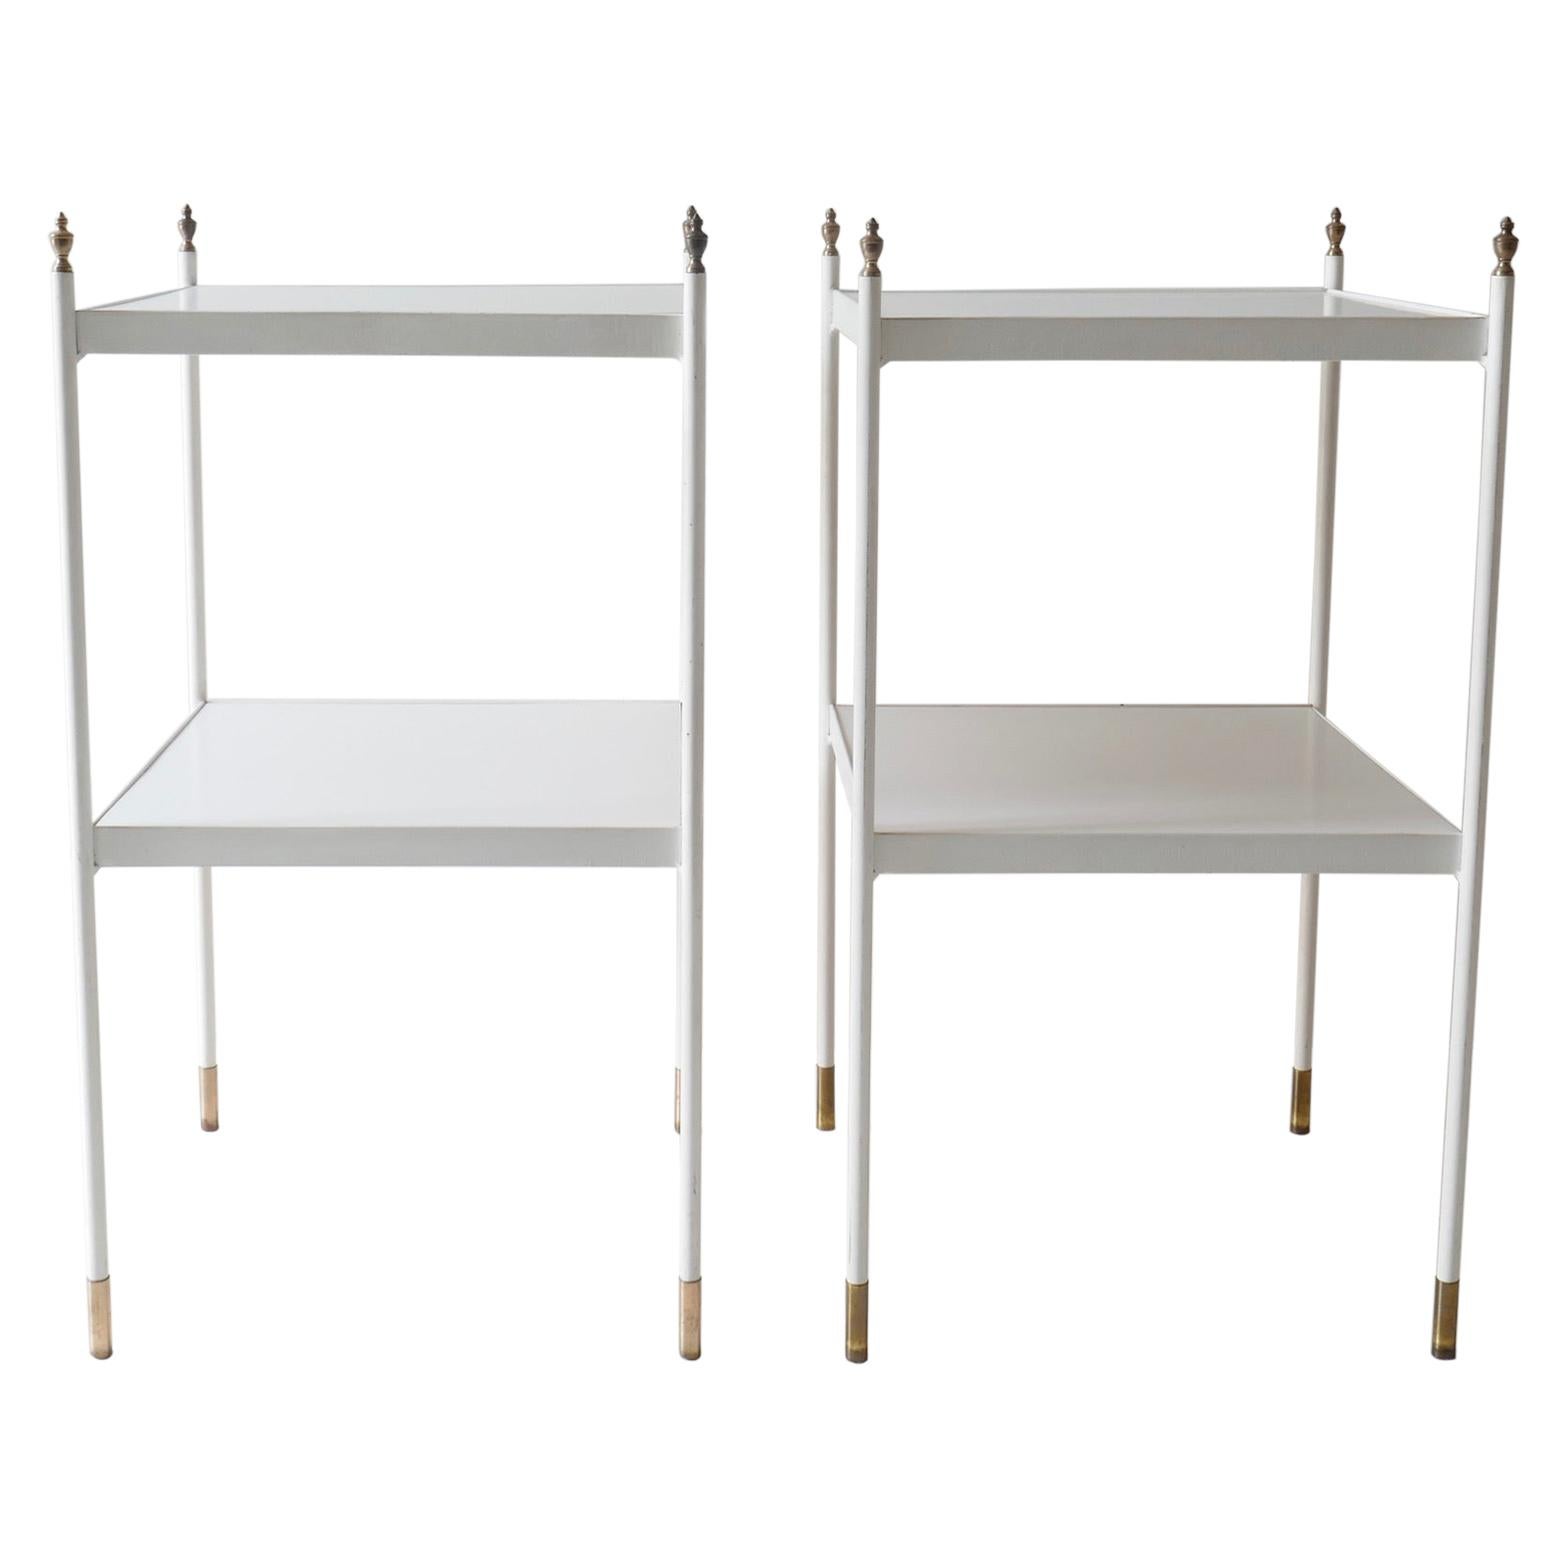 Pair of Two-Tier White Side Tables with Brass Ornaments, 1960s For Sale